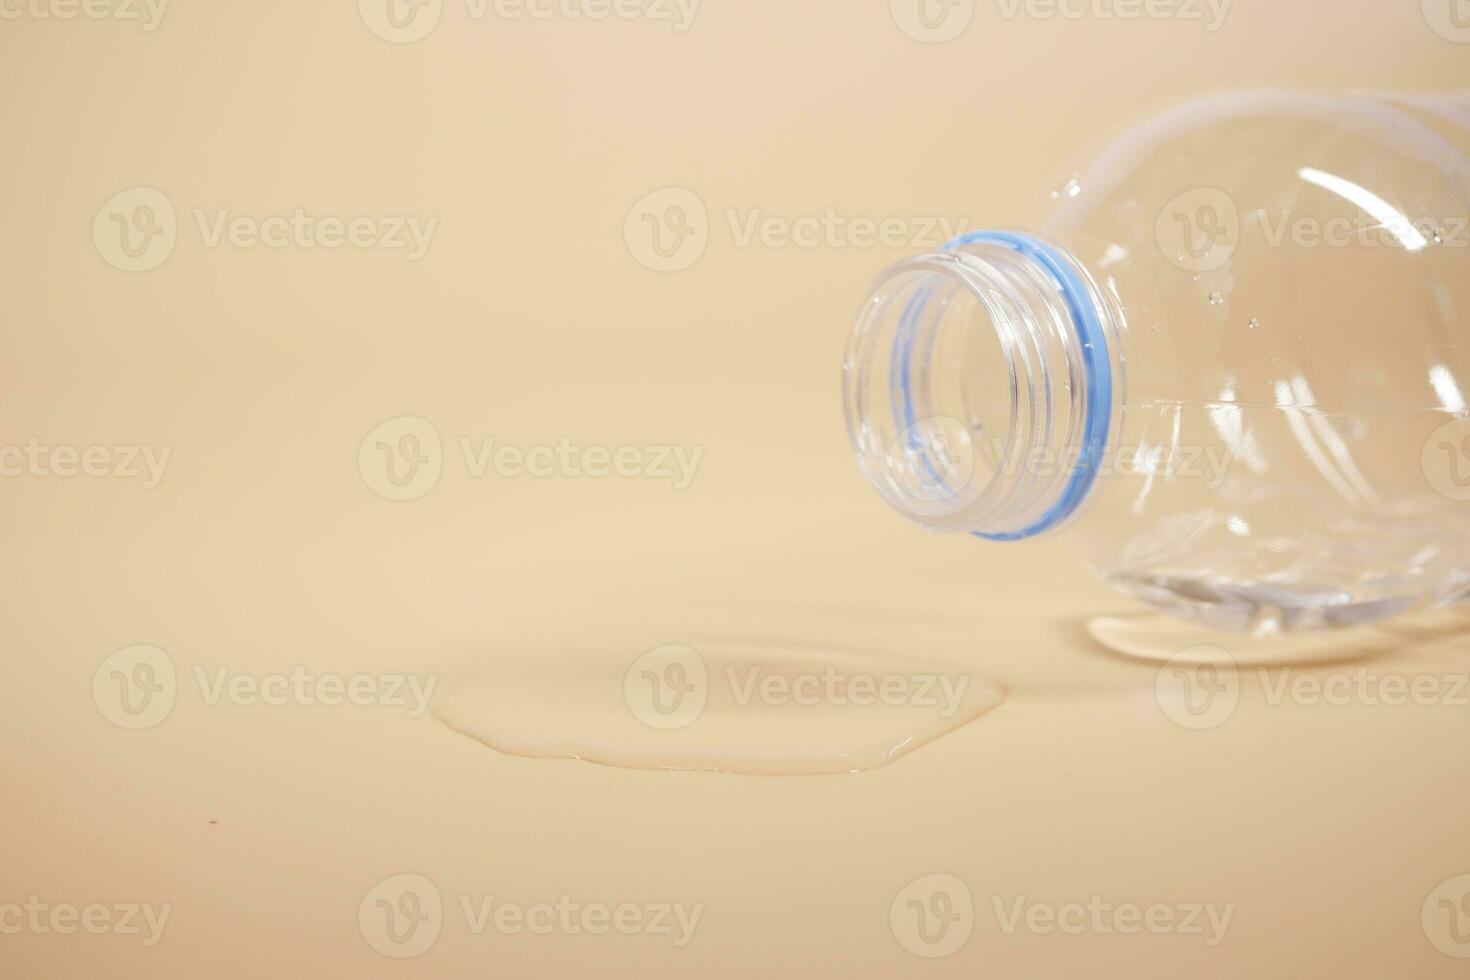 a bottle of water spilled on a table , photo